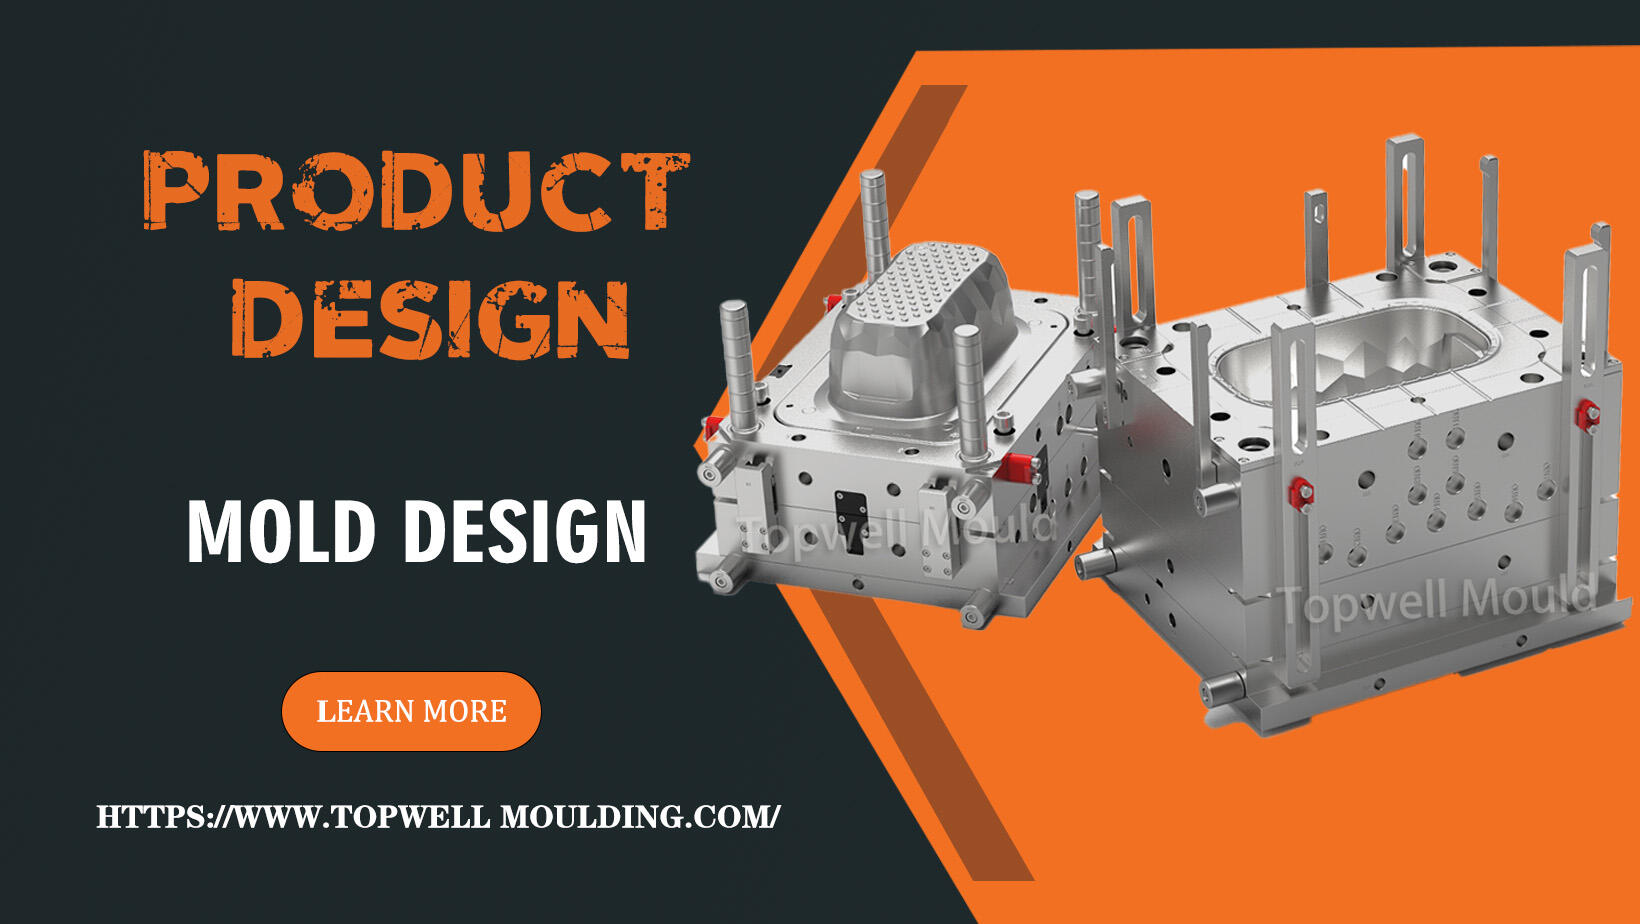 Mold Design；Mold Design and Tooling for Injection Molding.